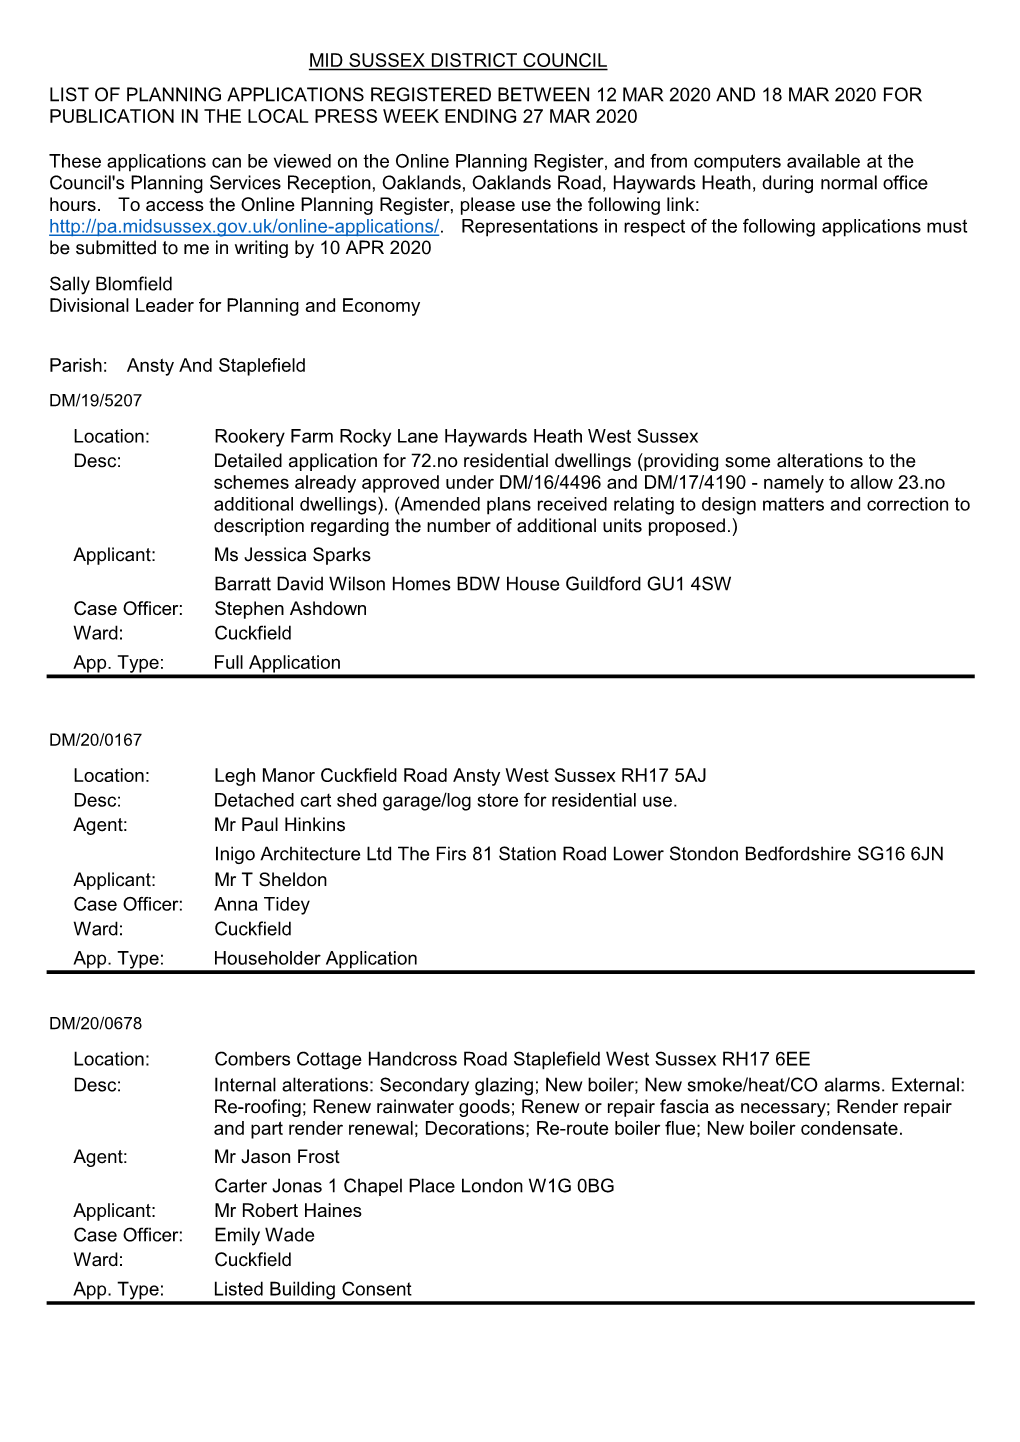 Mid Sussex District Council List of Planning Applications Registered Between 12 Mar 2020 and 18 Mar 2020 for Publication in the Local Press Week Ending 27 Mar 2020